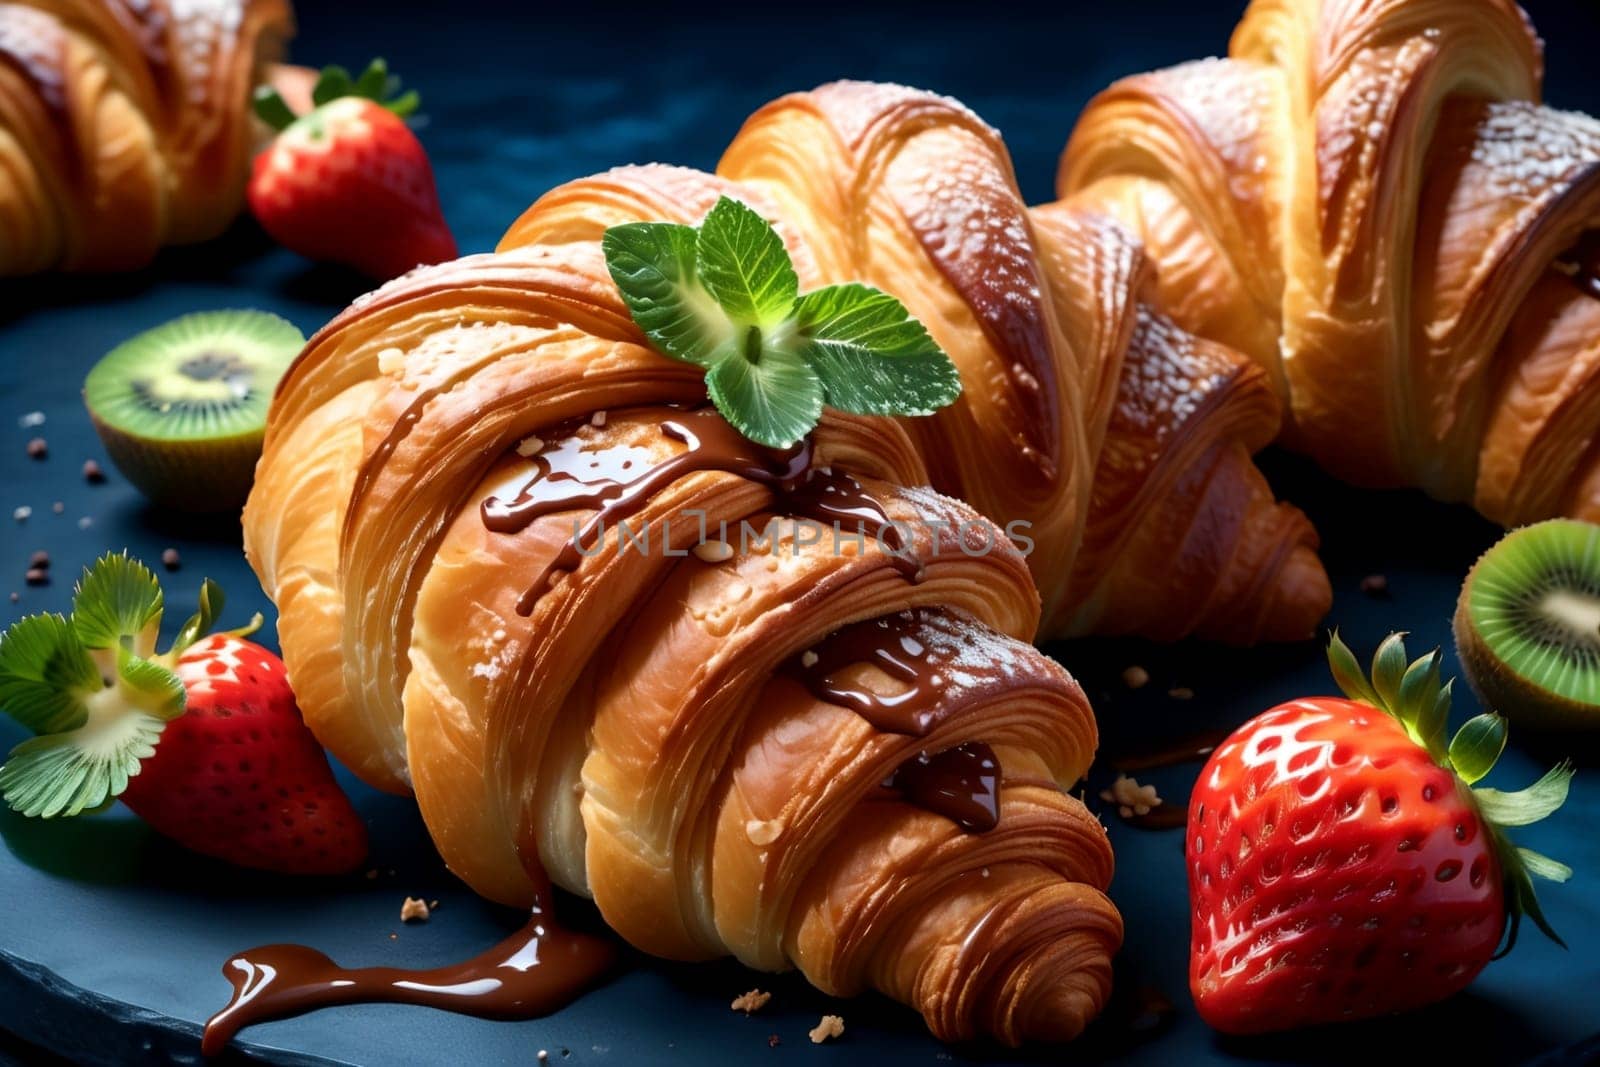 sweet pastries, croissants with strawberries and other fruits .